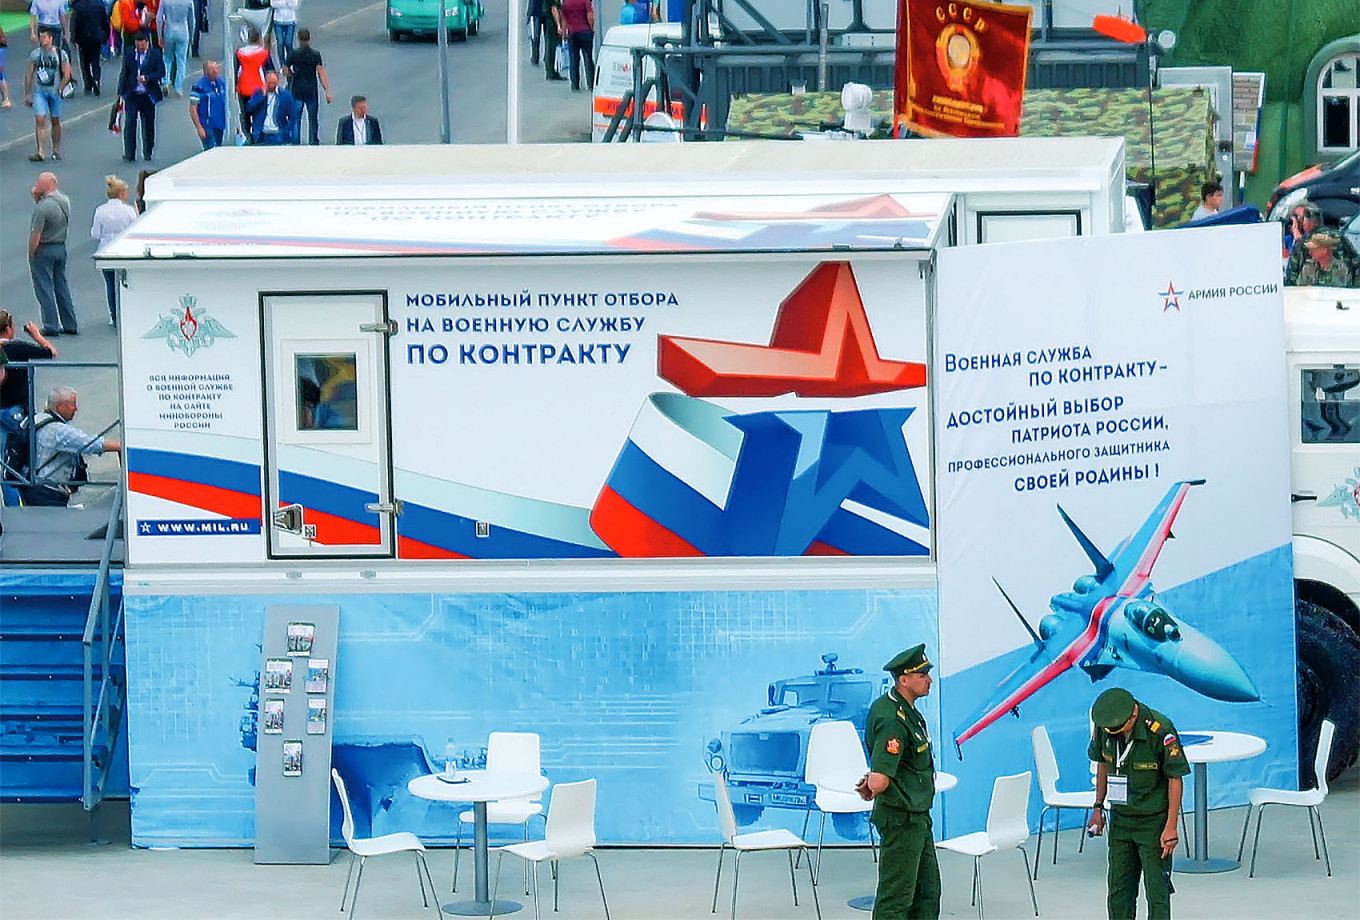 
					Mobile enlistment offices.					 					Russia's Defense Ministry				